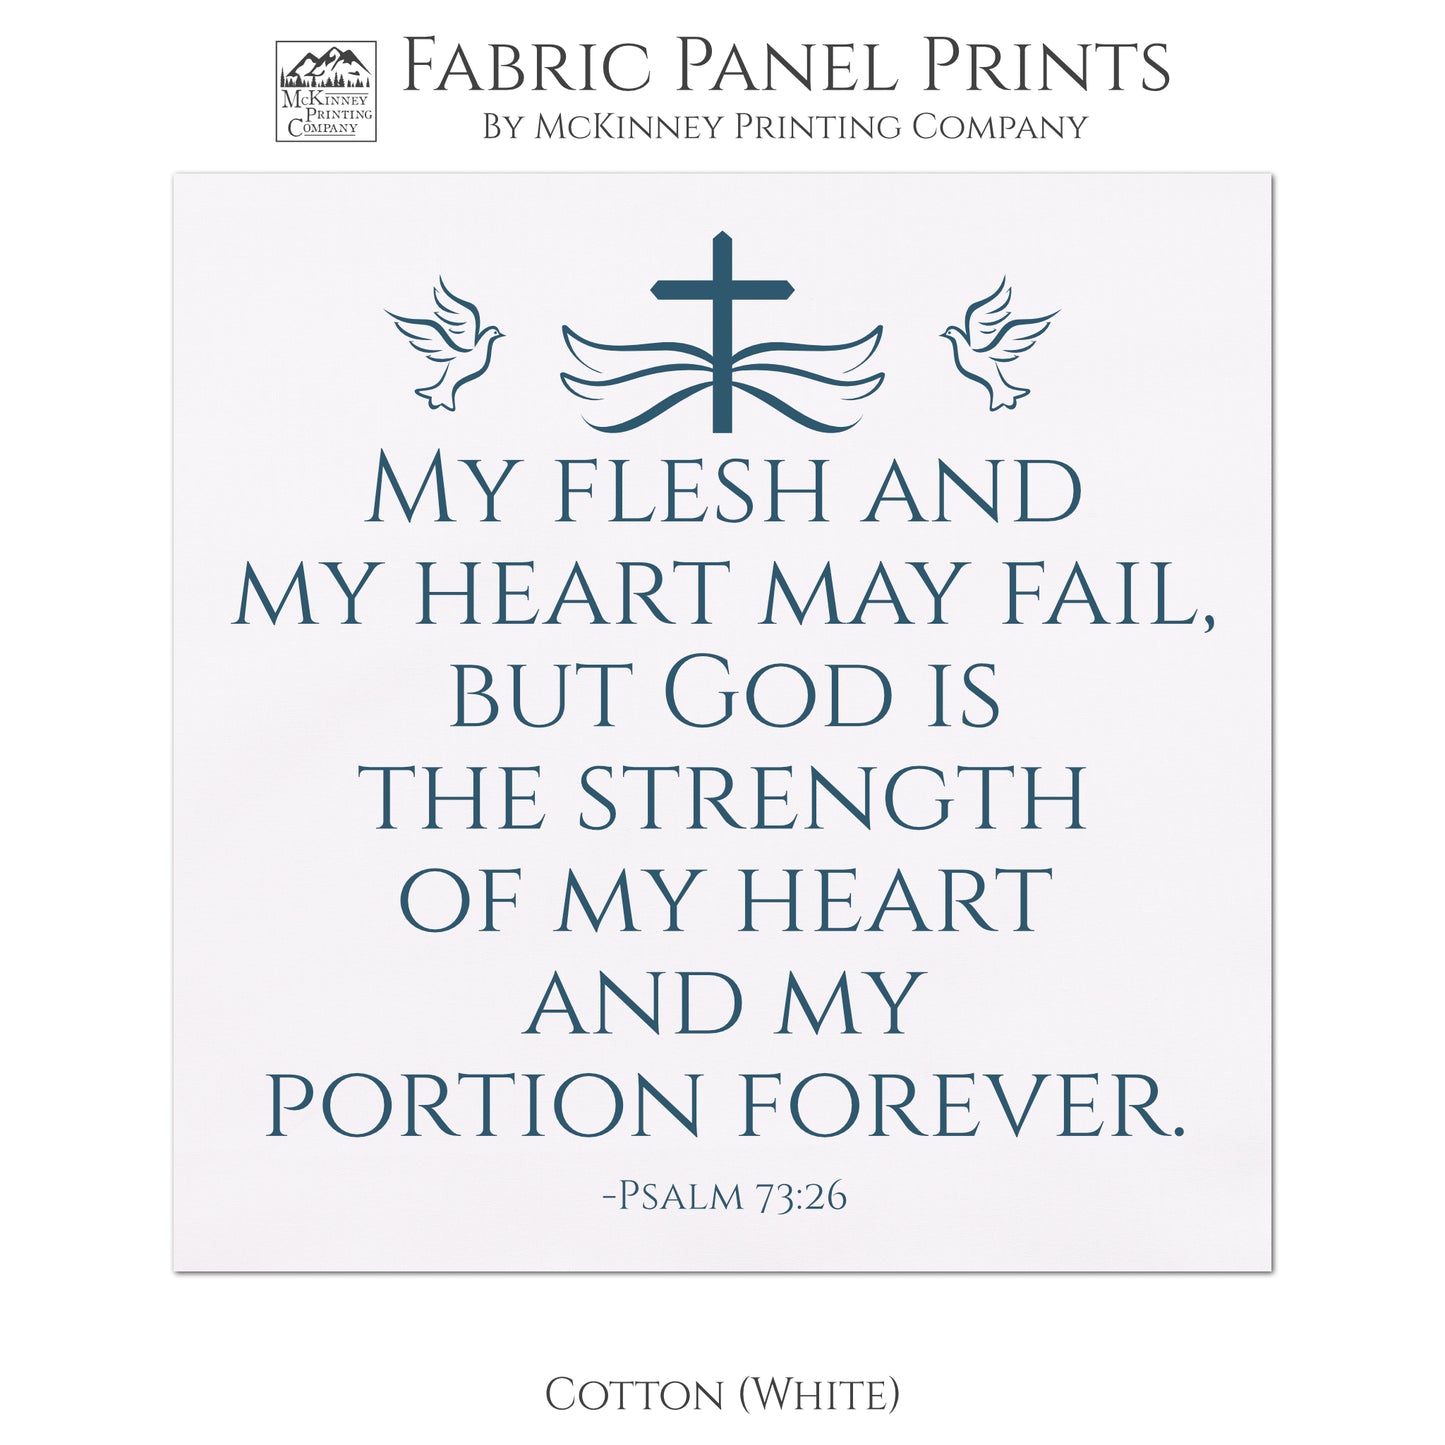 My flesh and my heart may fail, but God is the strength of my heart and my portion forever - Psalm 73:26 - Fabric Panel Print, Quilt Block - Cotton, White